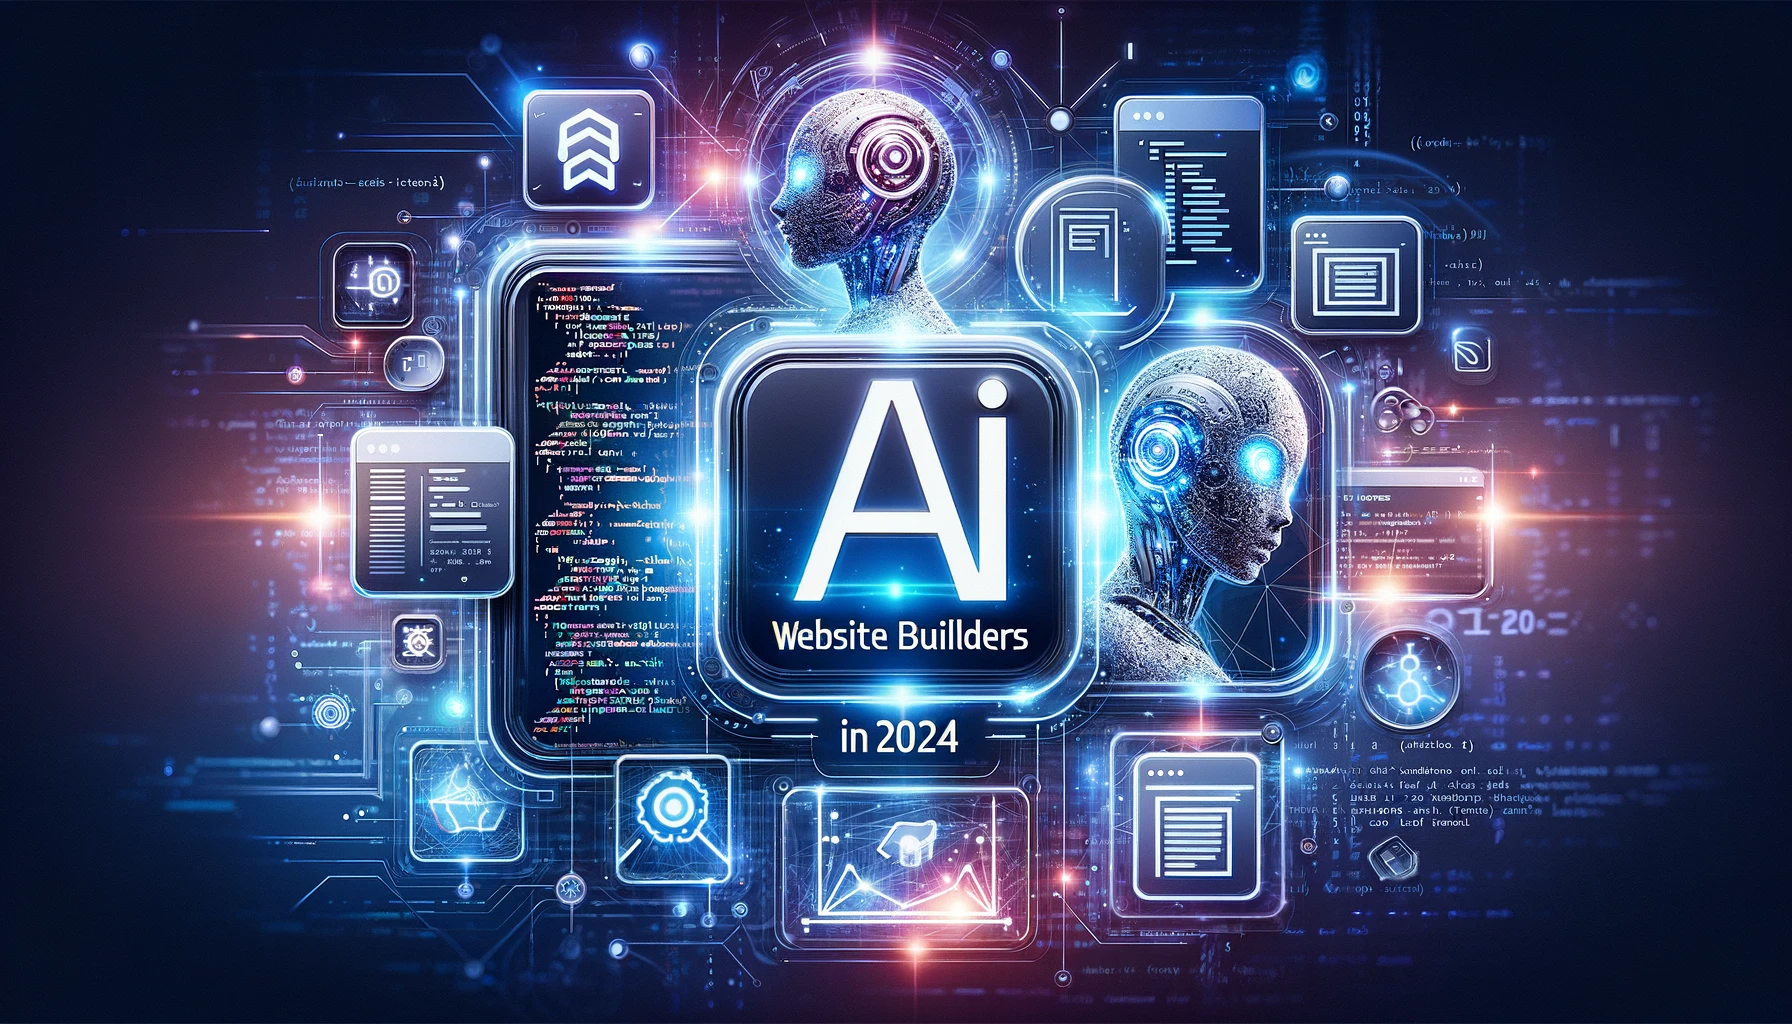 Featured image of an article on Best AI Website Builders in 2024